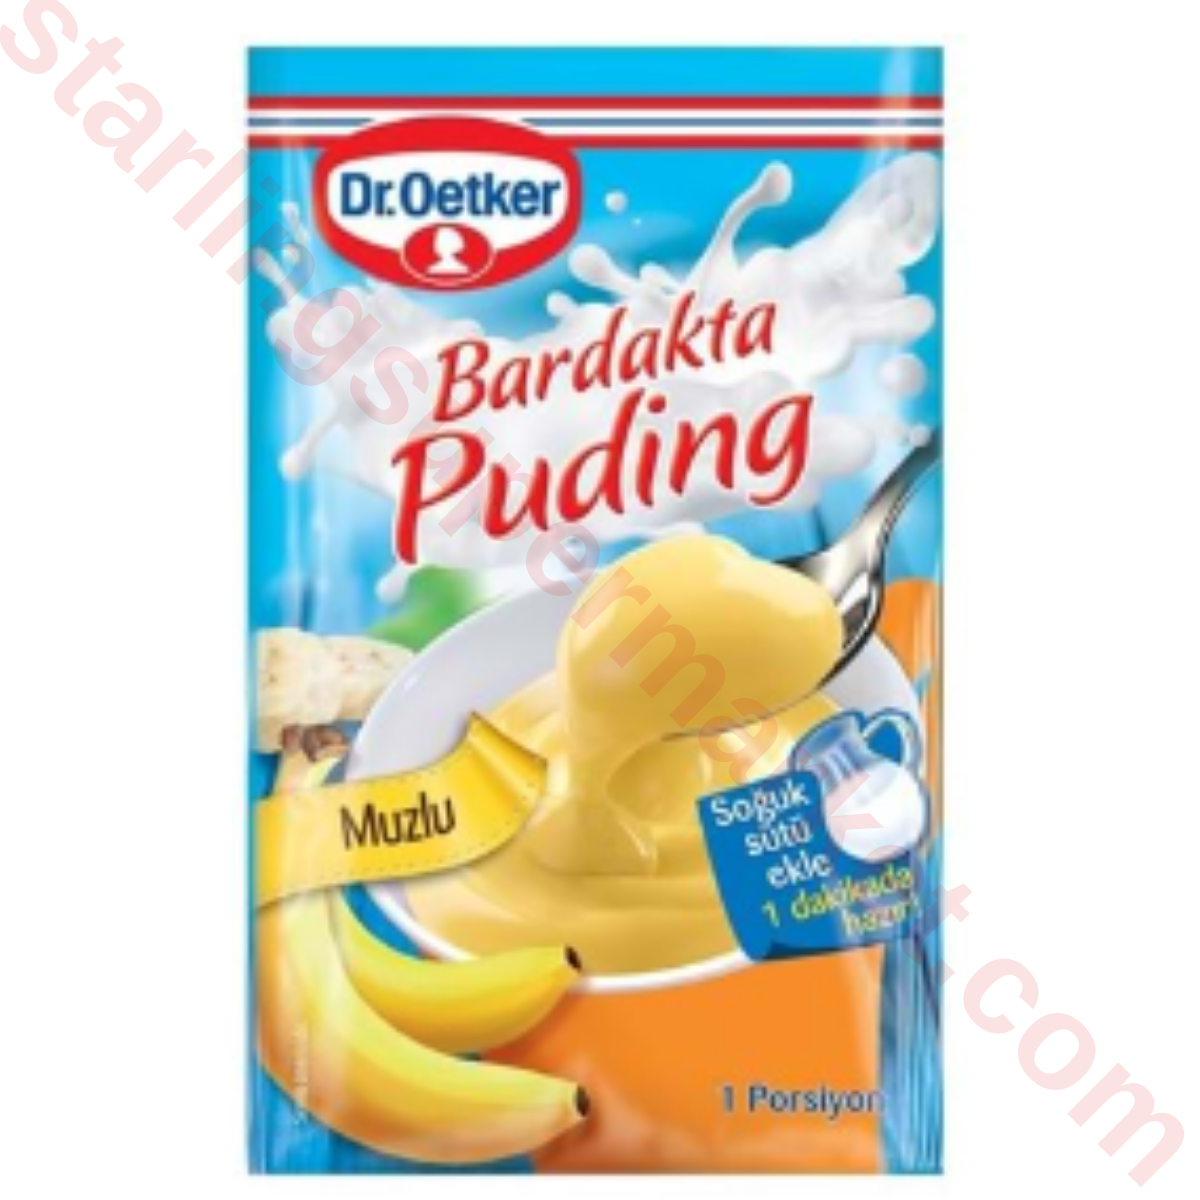 DR OETKER PUDDING BANANA IN A GLASS 30 G